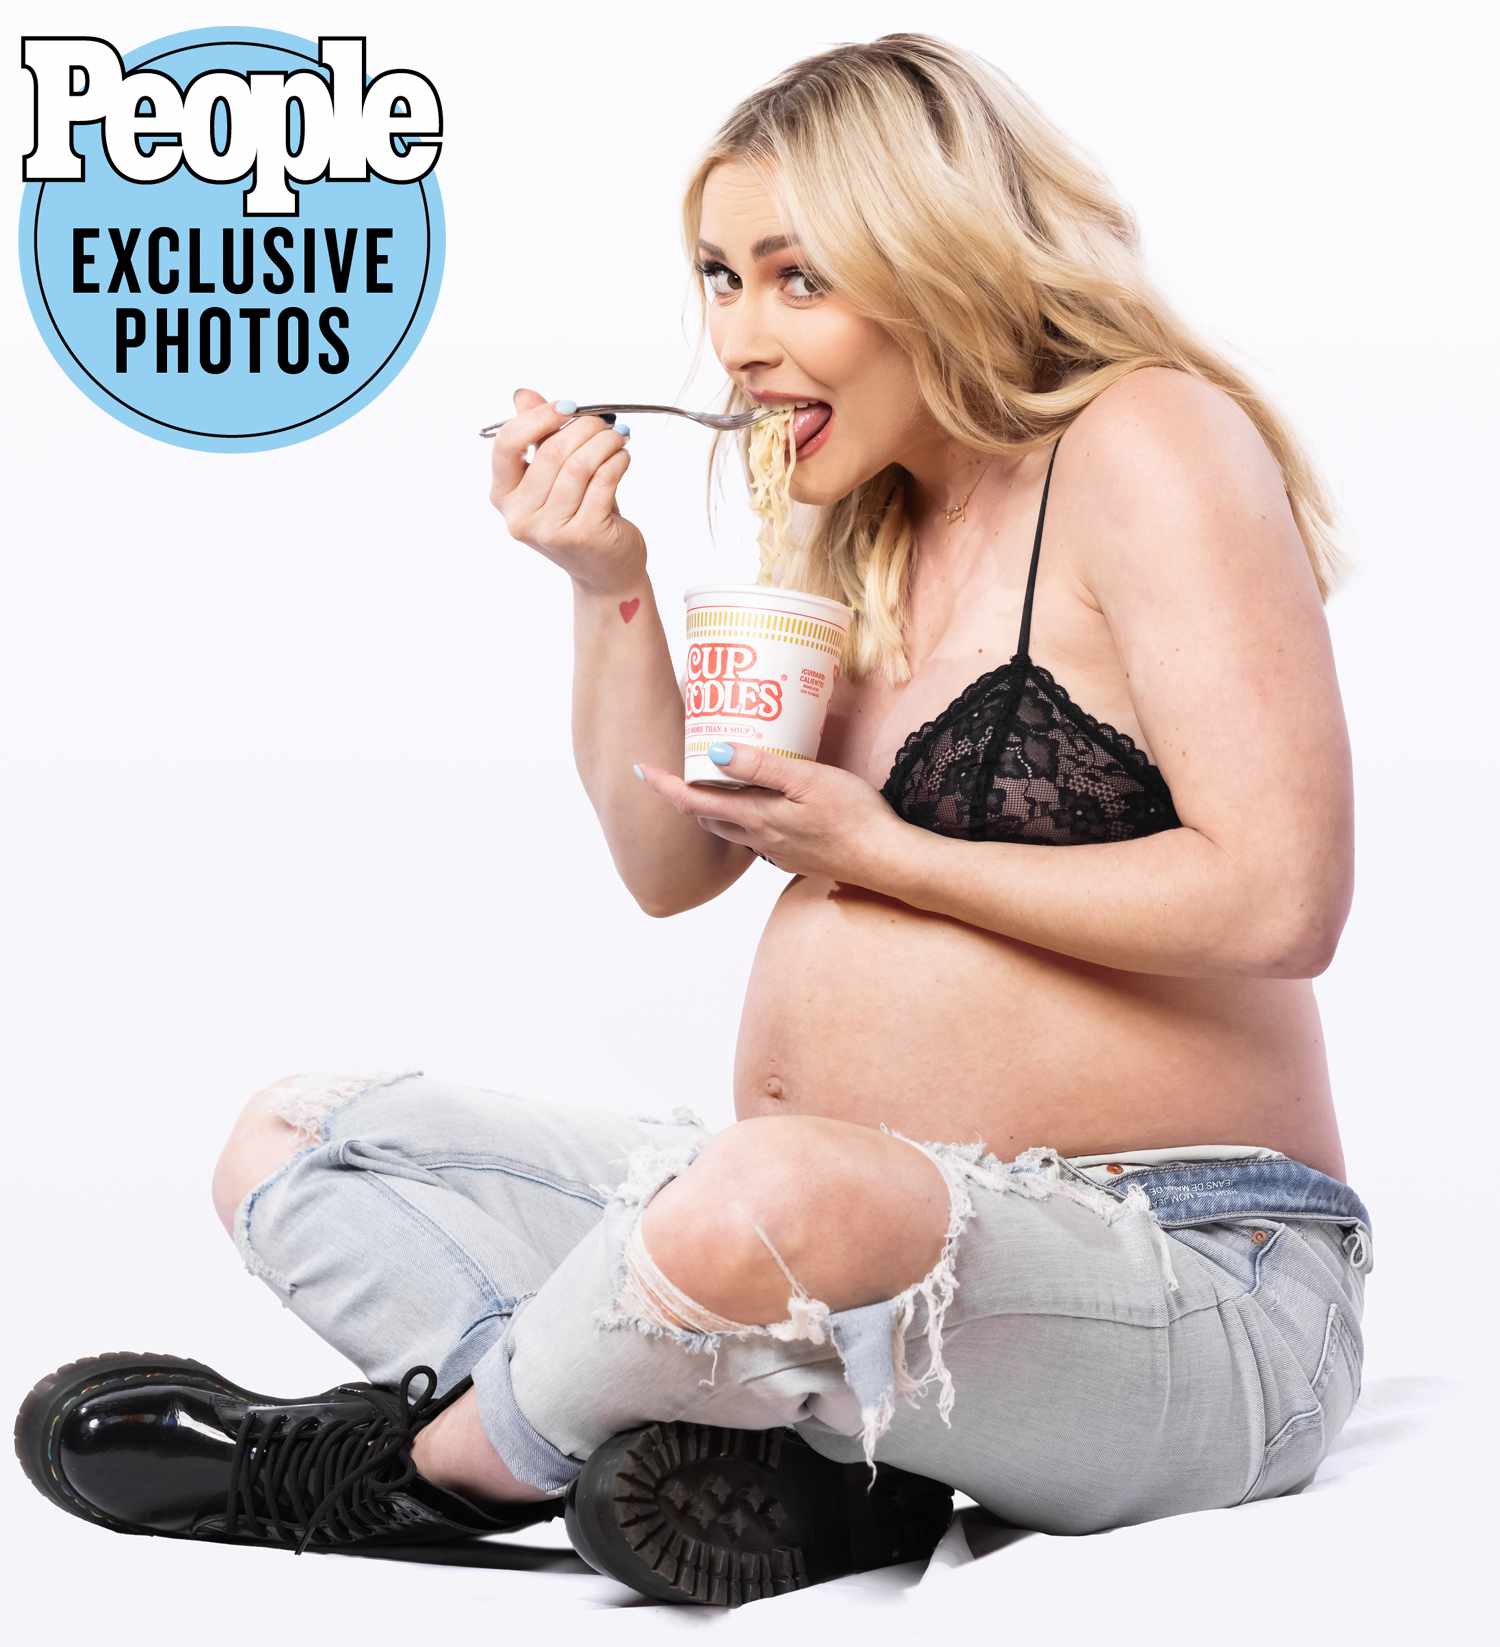 Ex WWE Star Renee Young Share Naked Pregnancy Photos 4